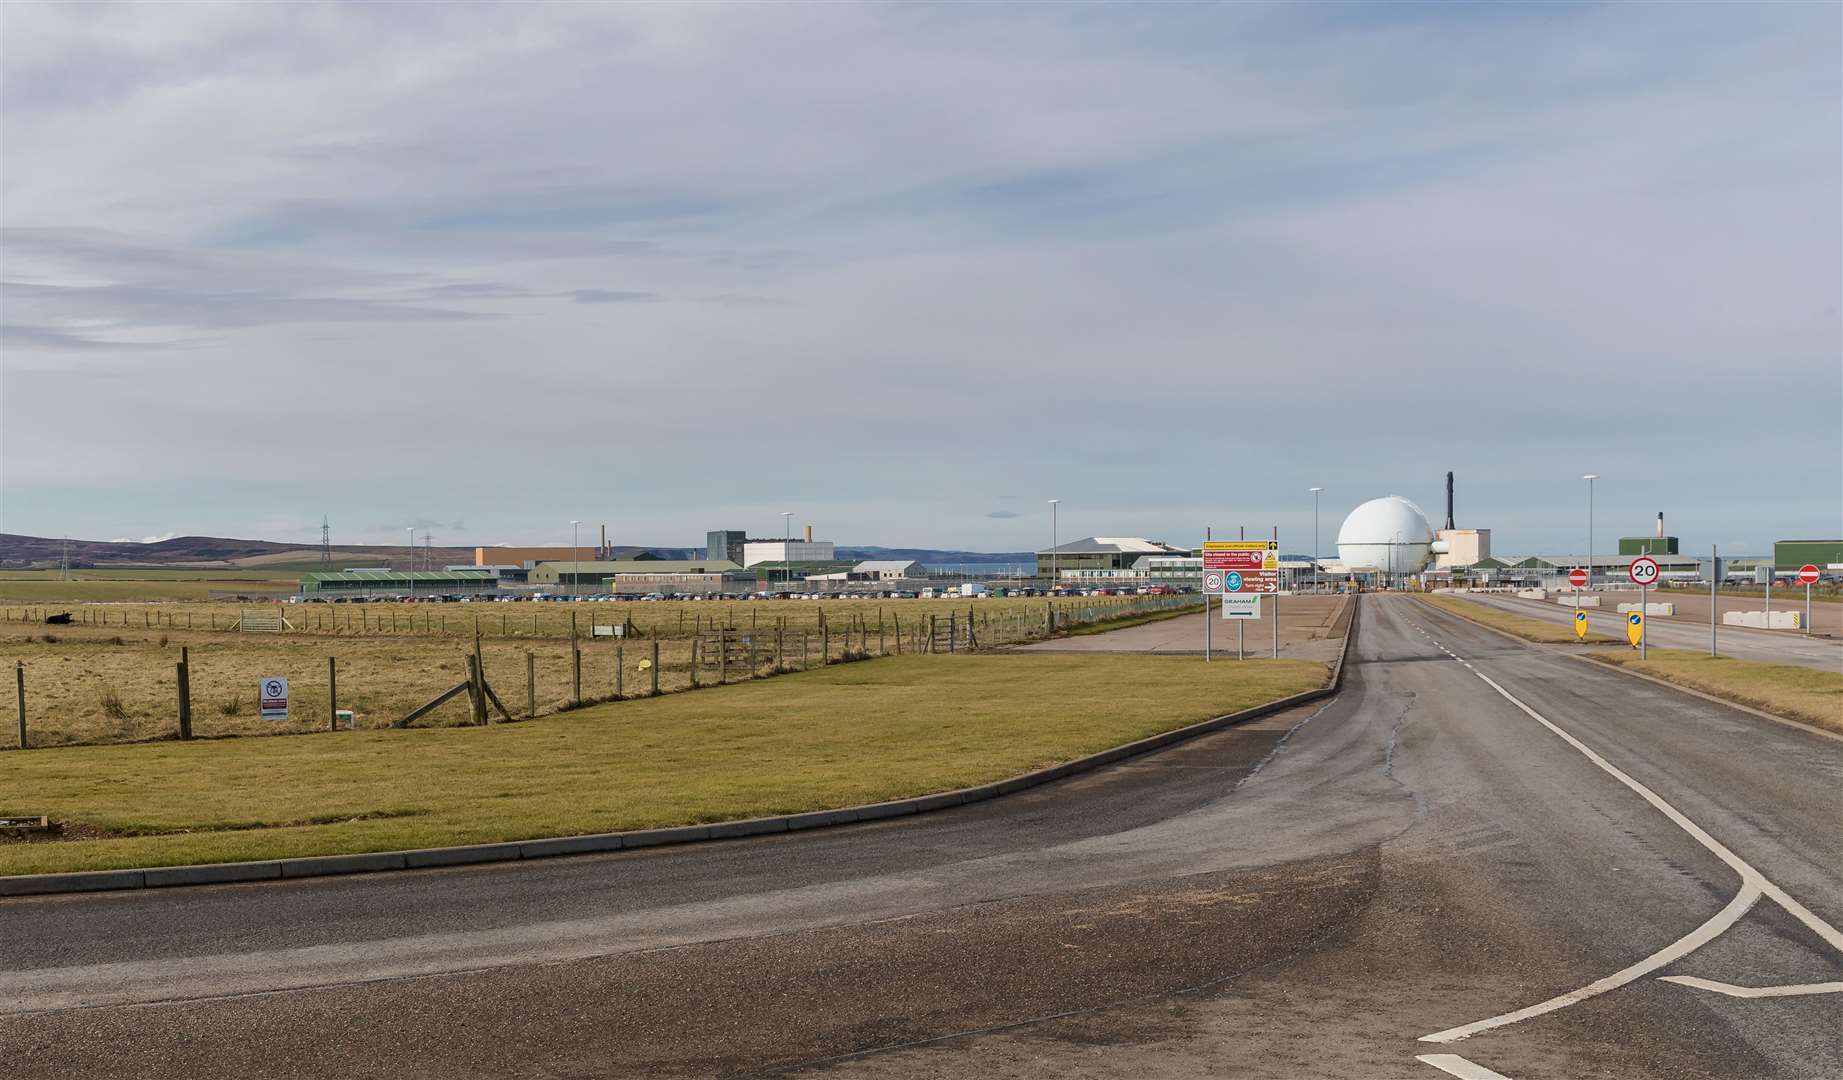 The Dounreay site entrance in 2020. Picture: DSRL / NDA